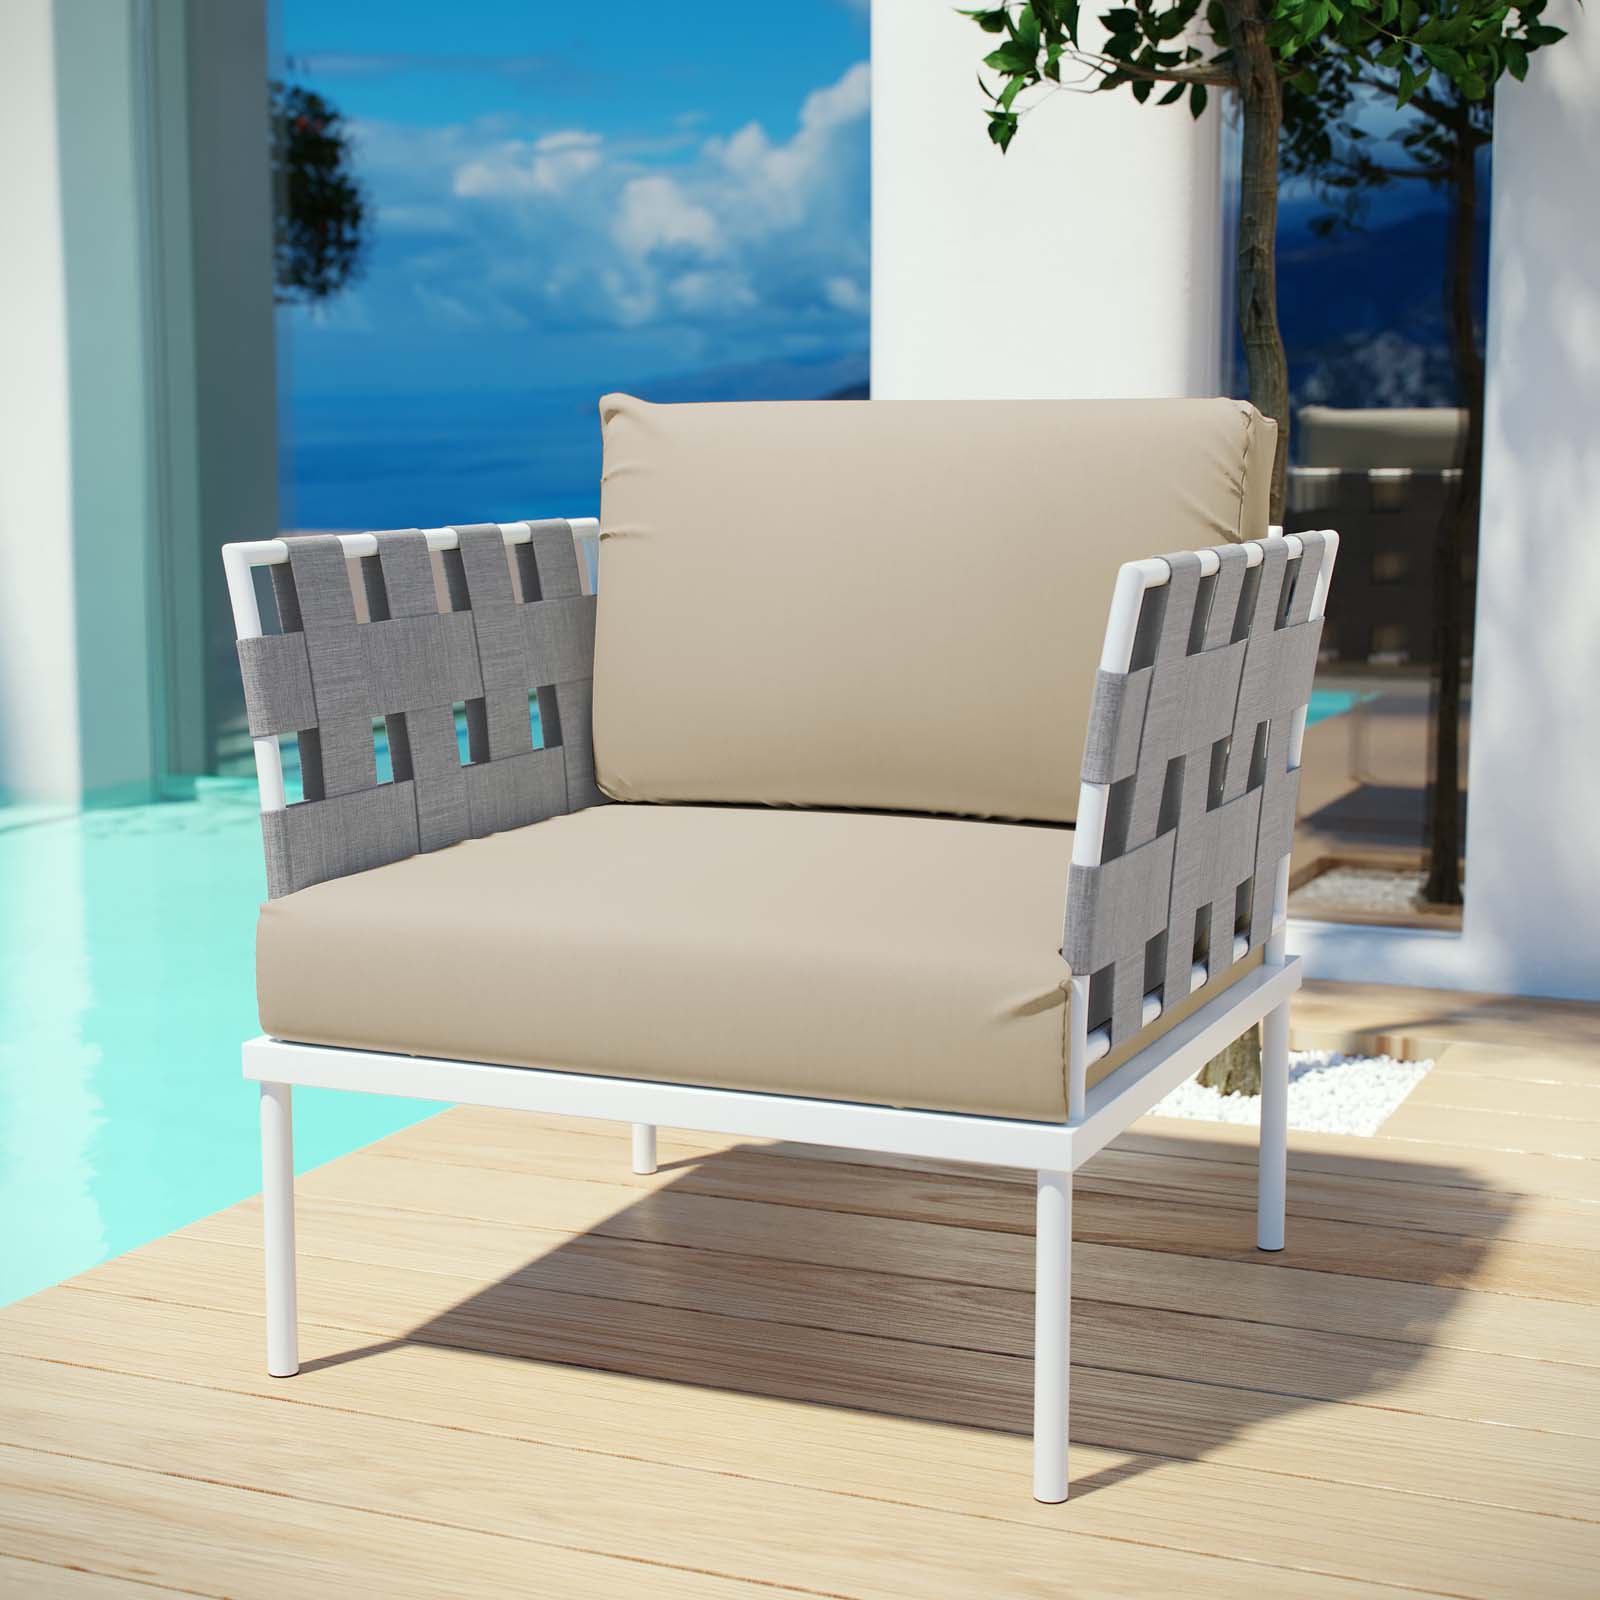 Modern Contemporary Urban Design Outdoor Patio Balcony Lounge Chair, Beige White, Rattan - image 2 of 5